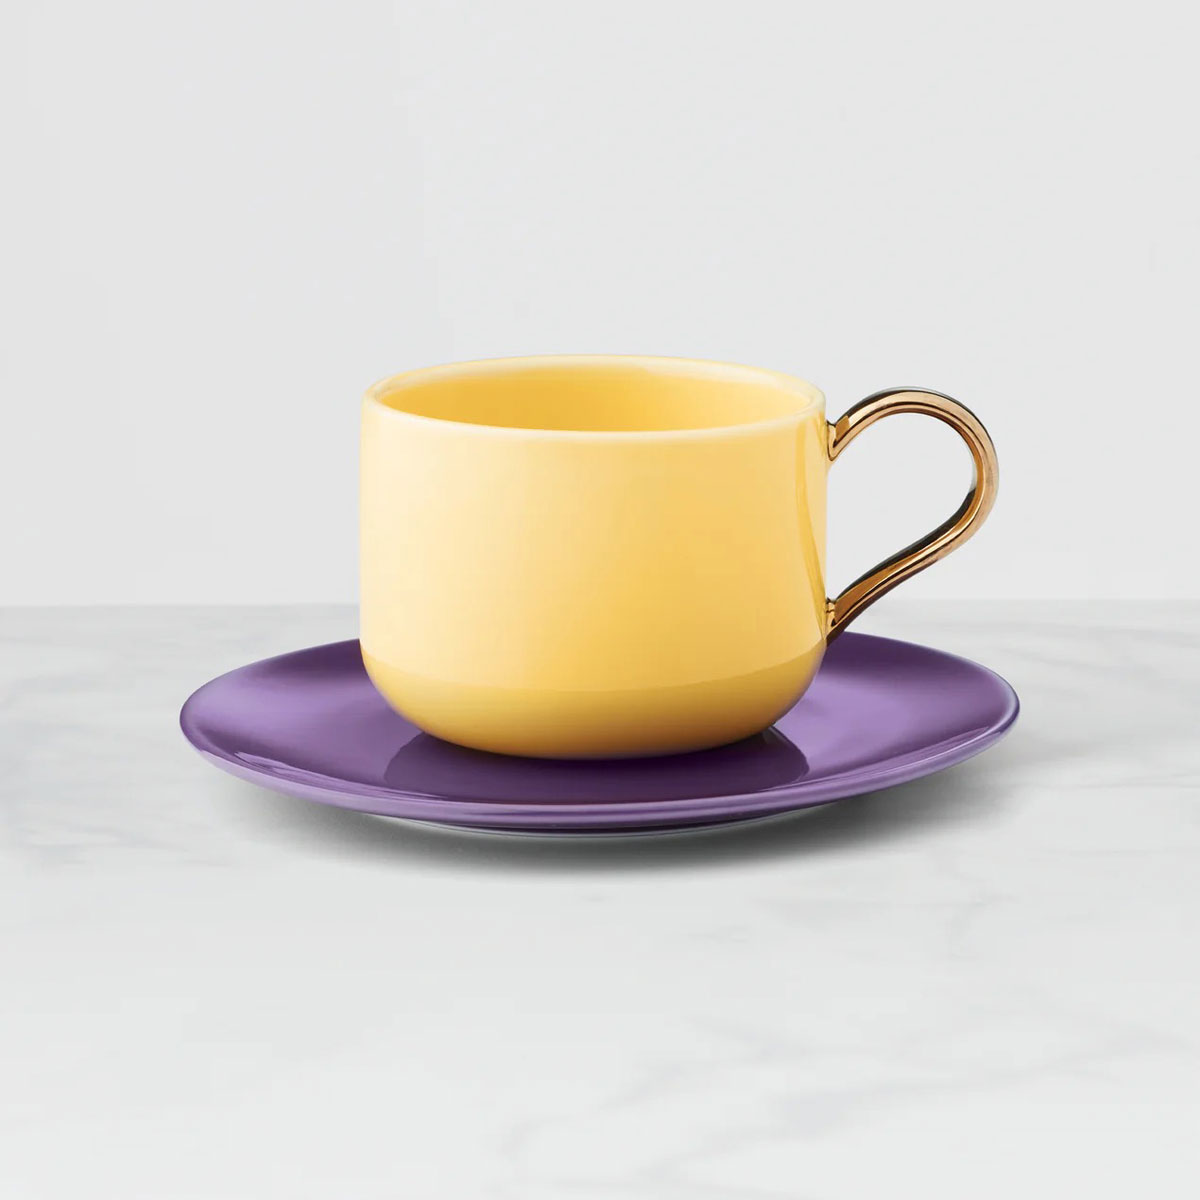 Kate Spade, Lenox Make It Pop Cup, Saucer Yellow with Purple